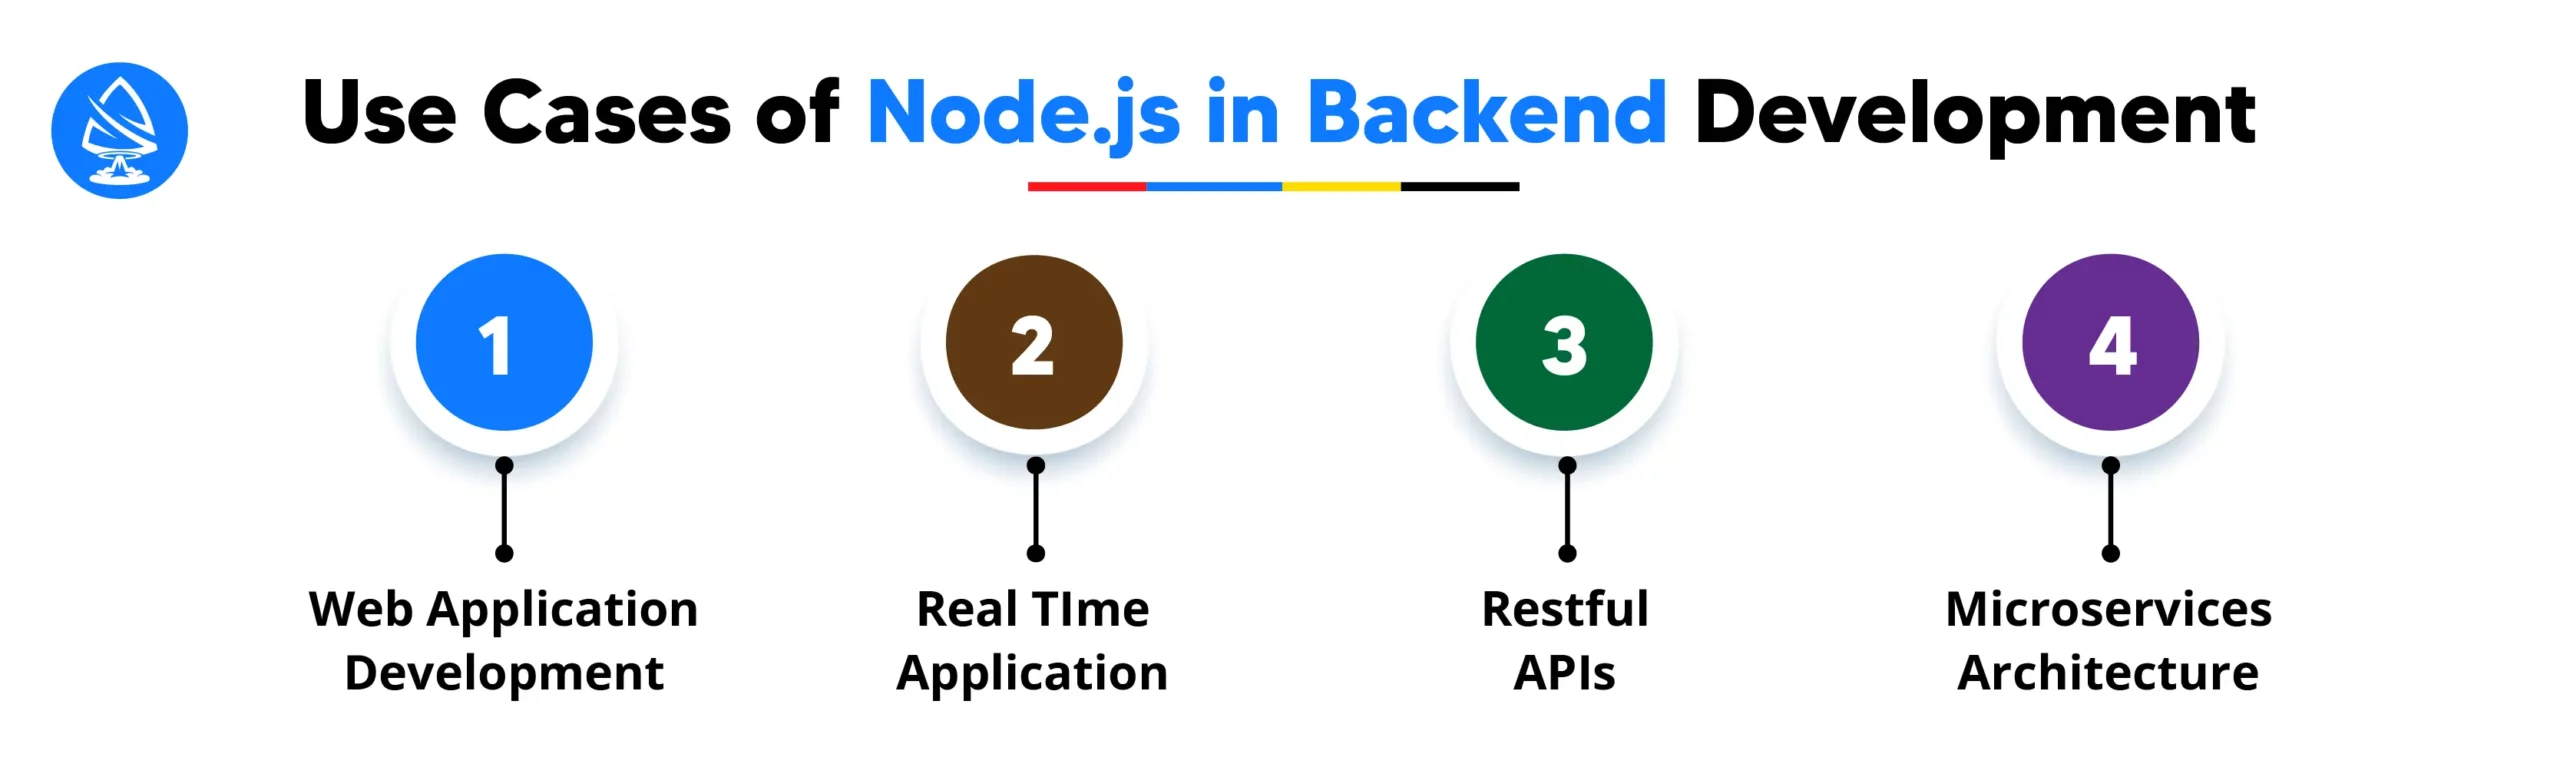 Use Cases of Node.js in Backend Development